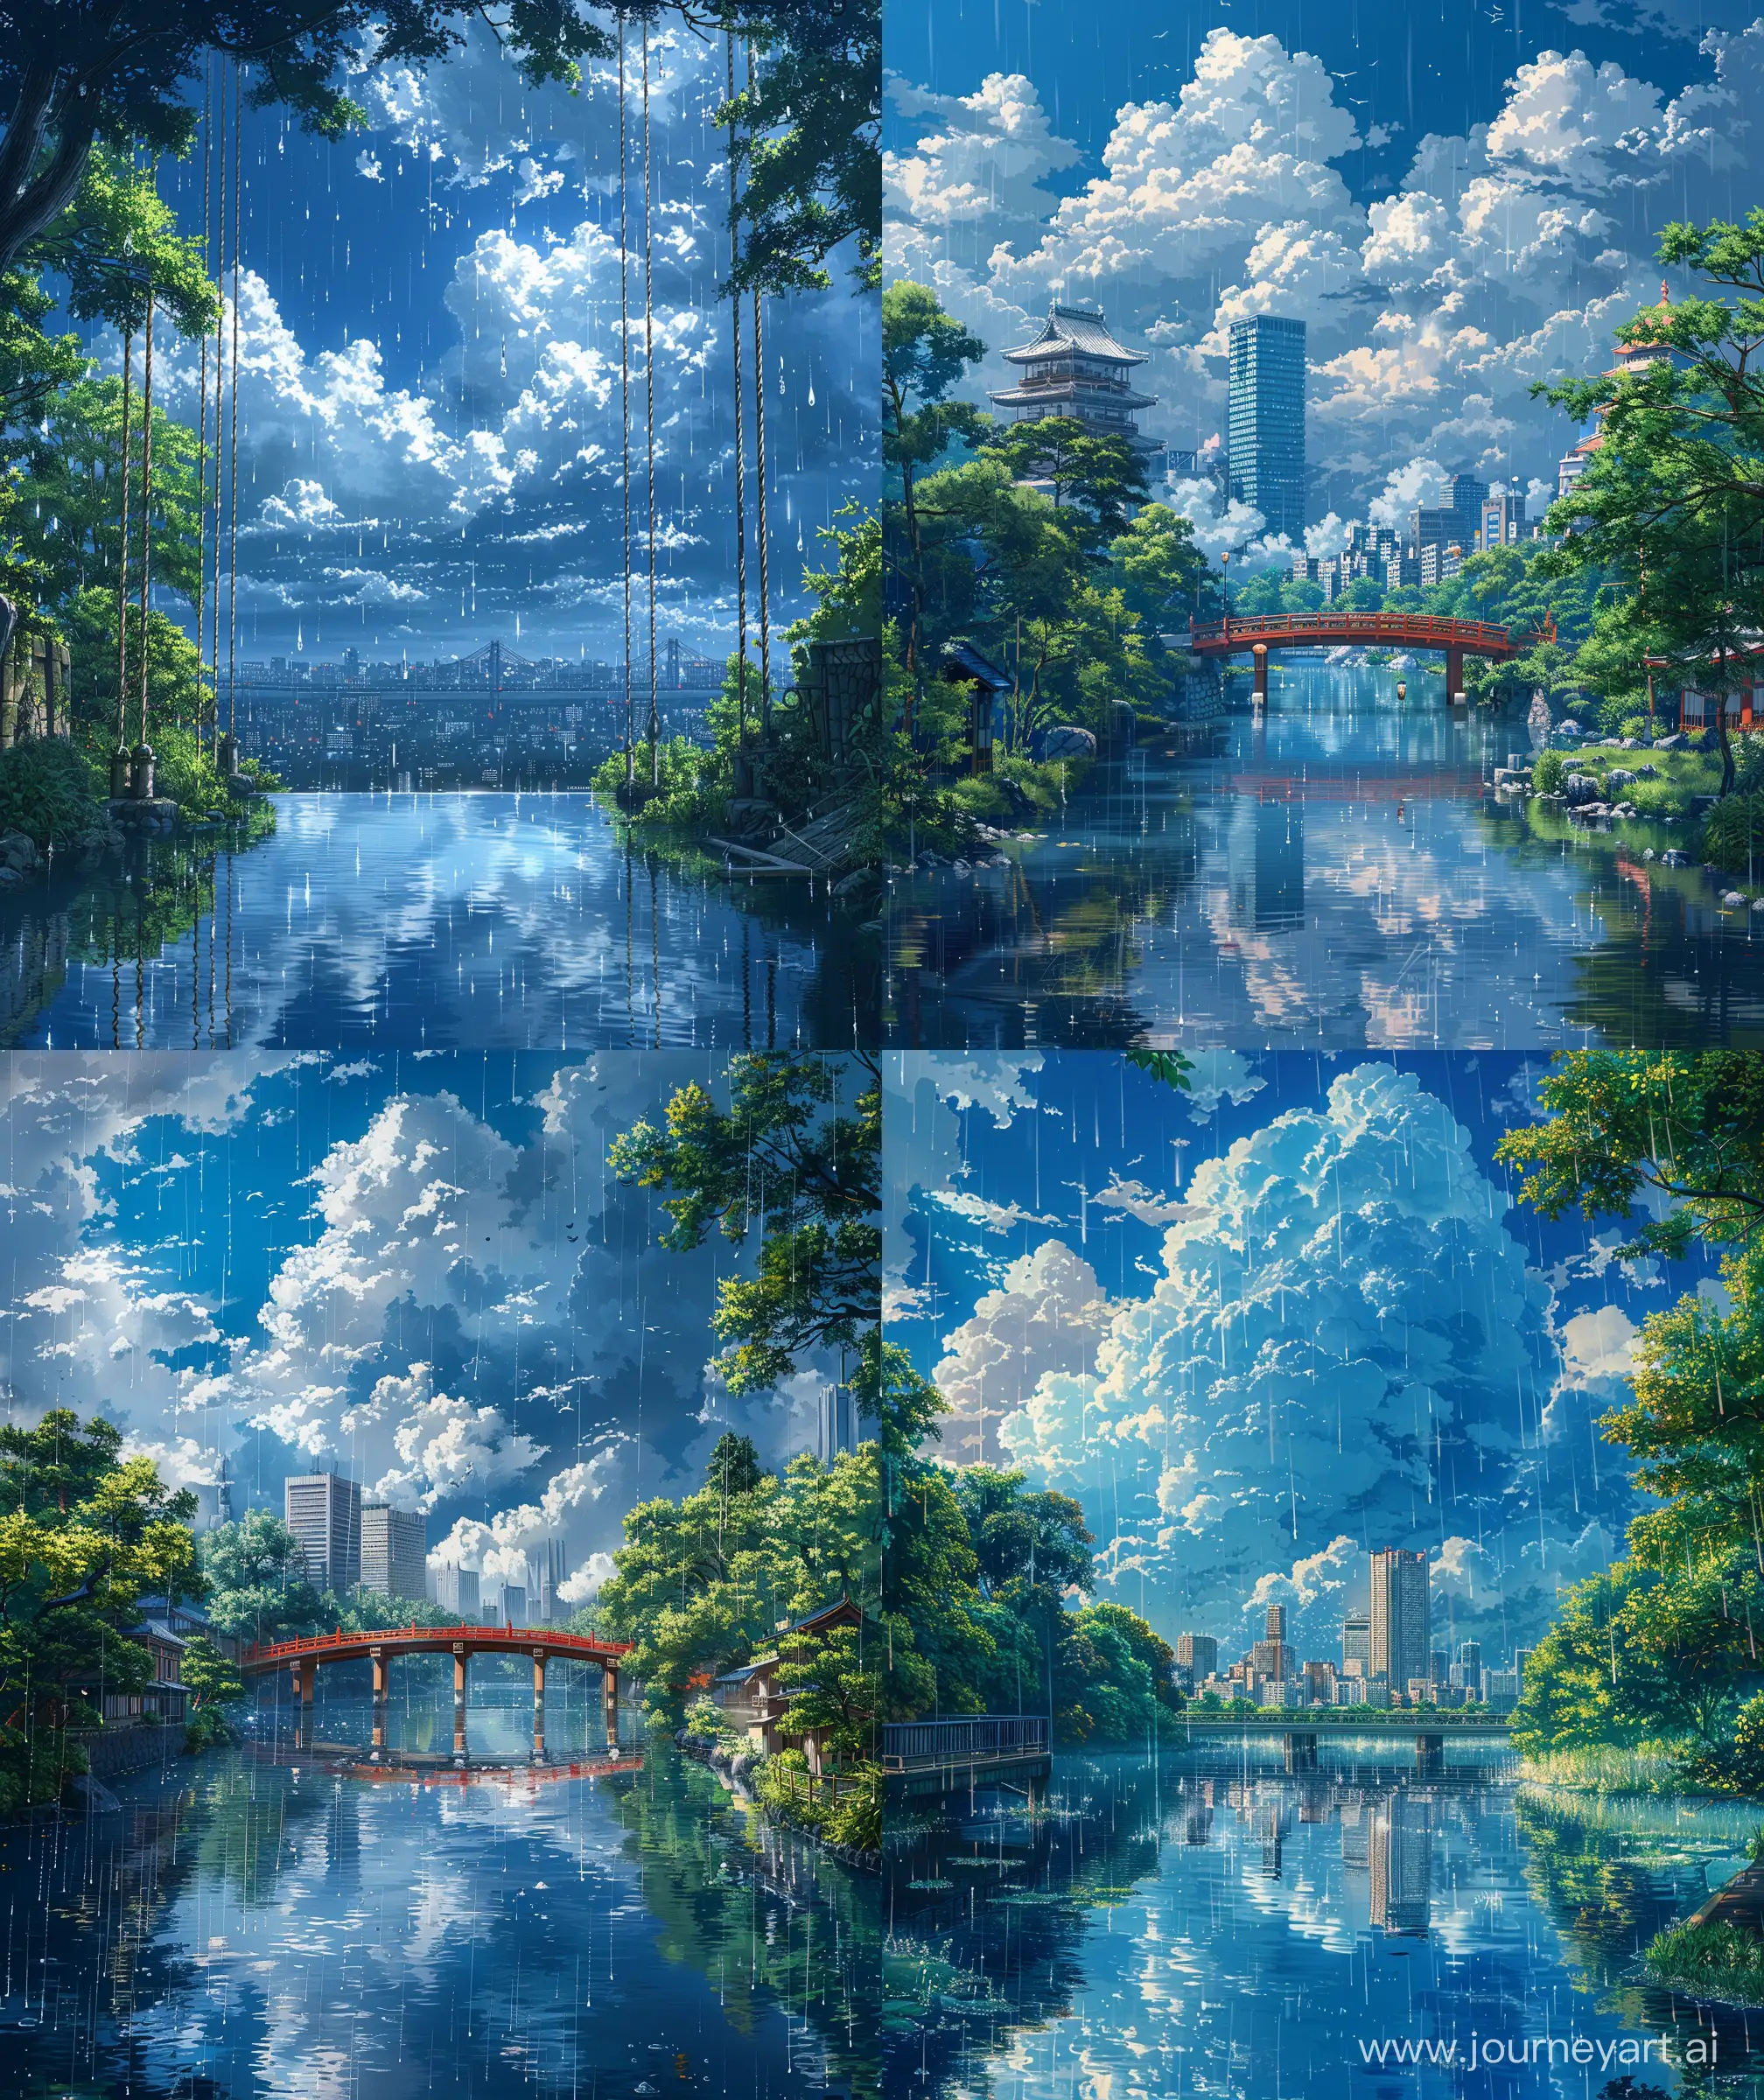 Beautiful anime view, mokoto shinkai and Ghibli style, city view, bridge, water reflection, beautiful blue sky, rain after sky, white and gray clouds around, beautiful atmosphere, illustration, ultra HD, high quality, sharp details, anime scenary, no hyperrealistic --ar 27:32 --s 1000